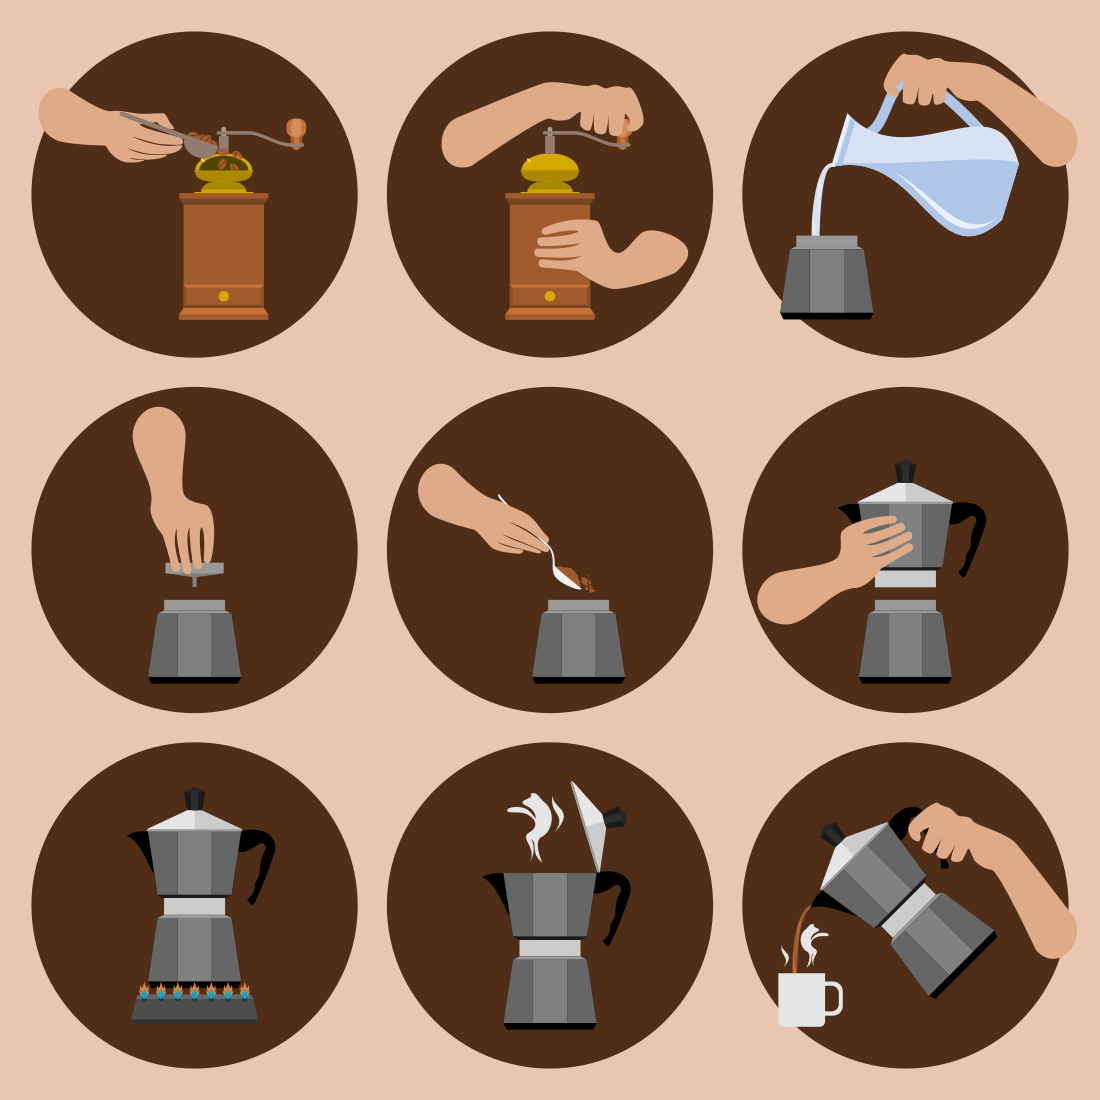 Percolator Coffee Instruction Vector Illustration Icons Set cover image.